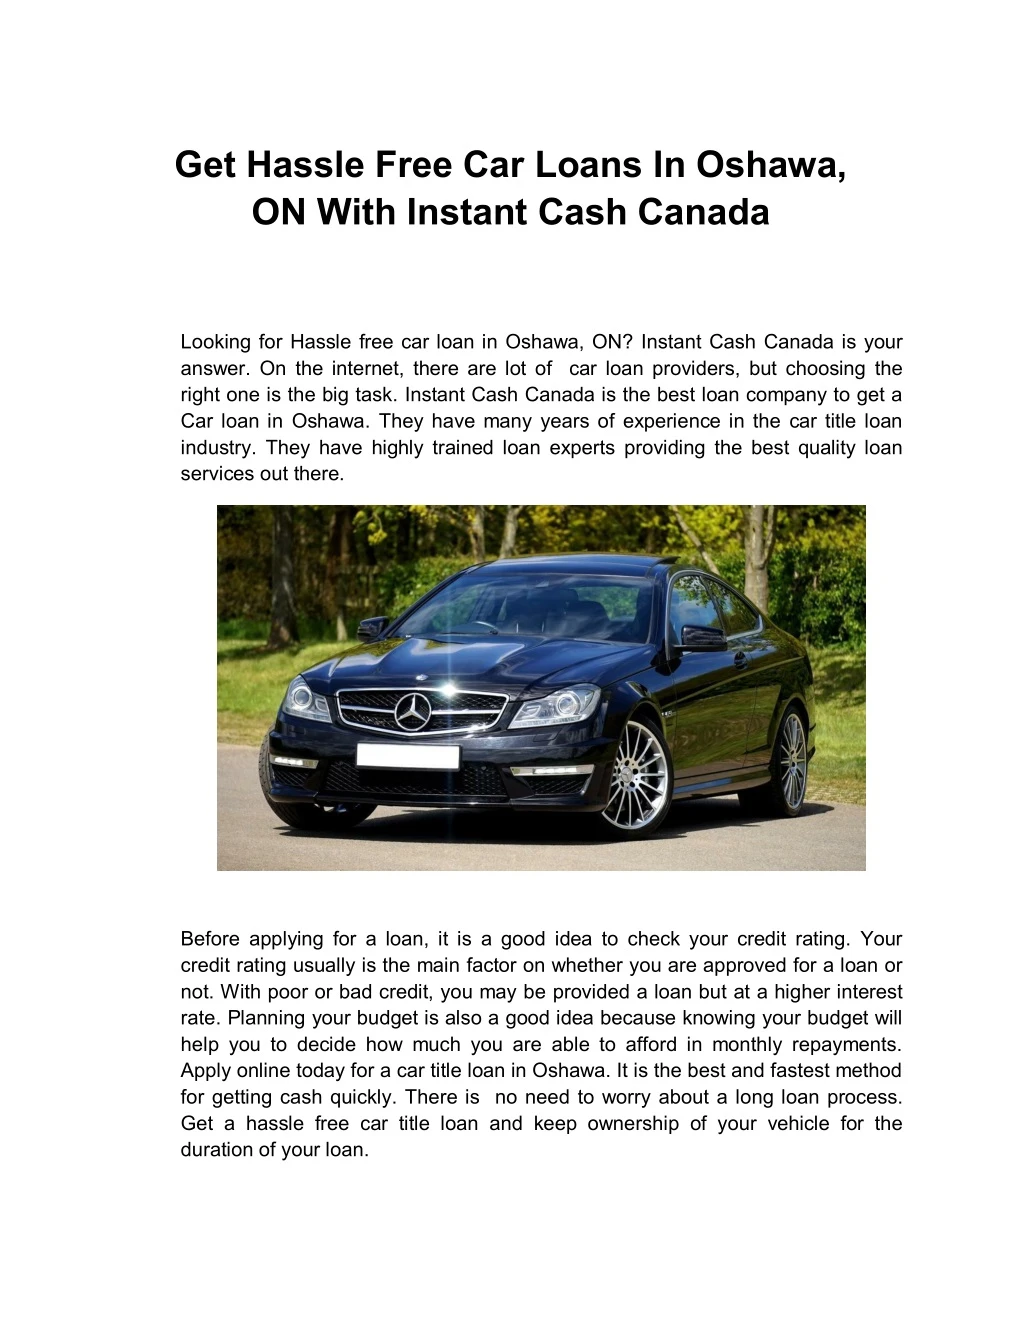 get hassle free car loans in oshawa on with